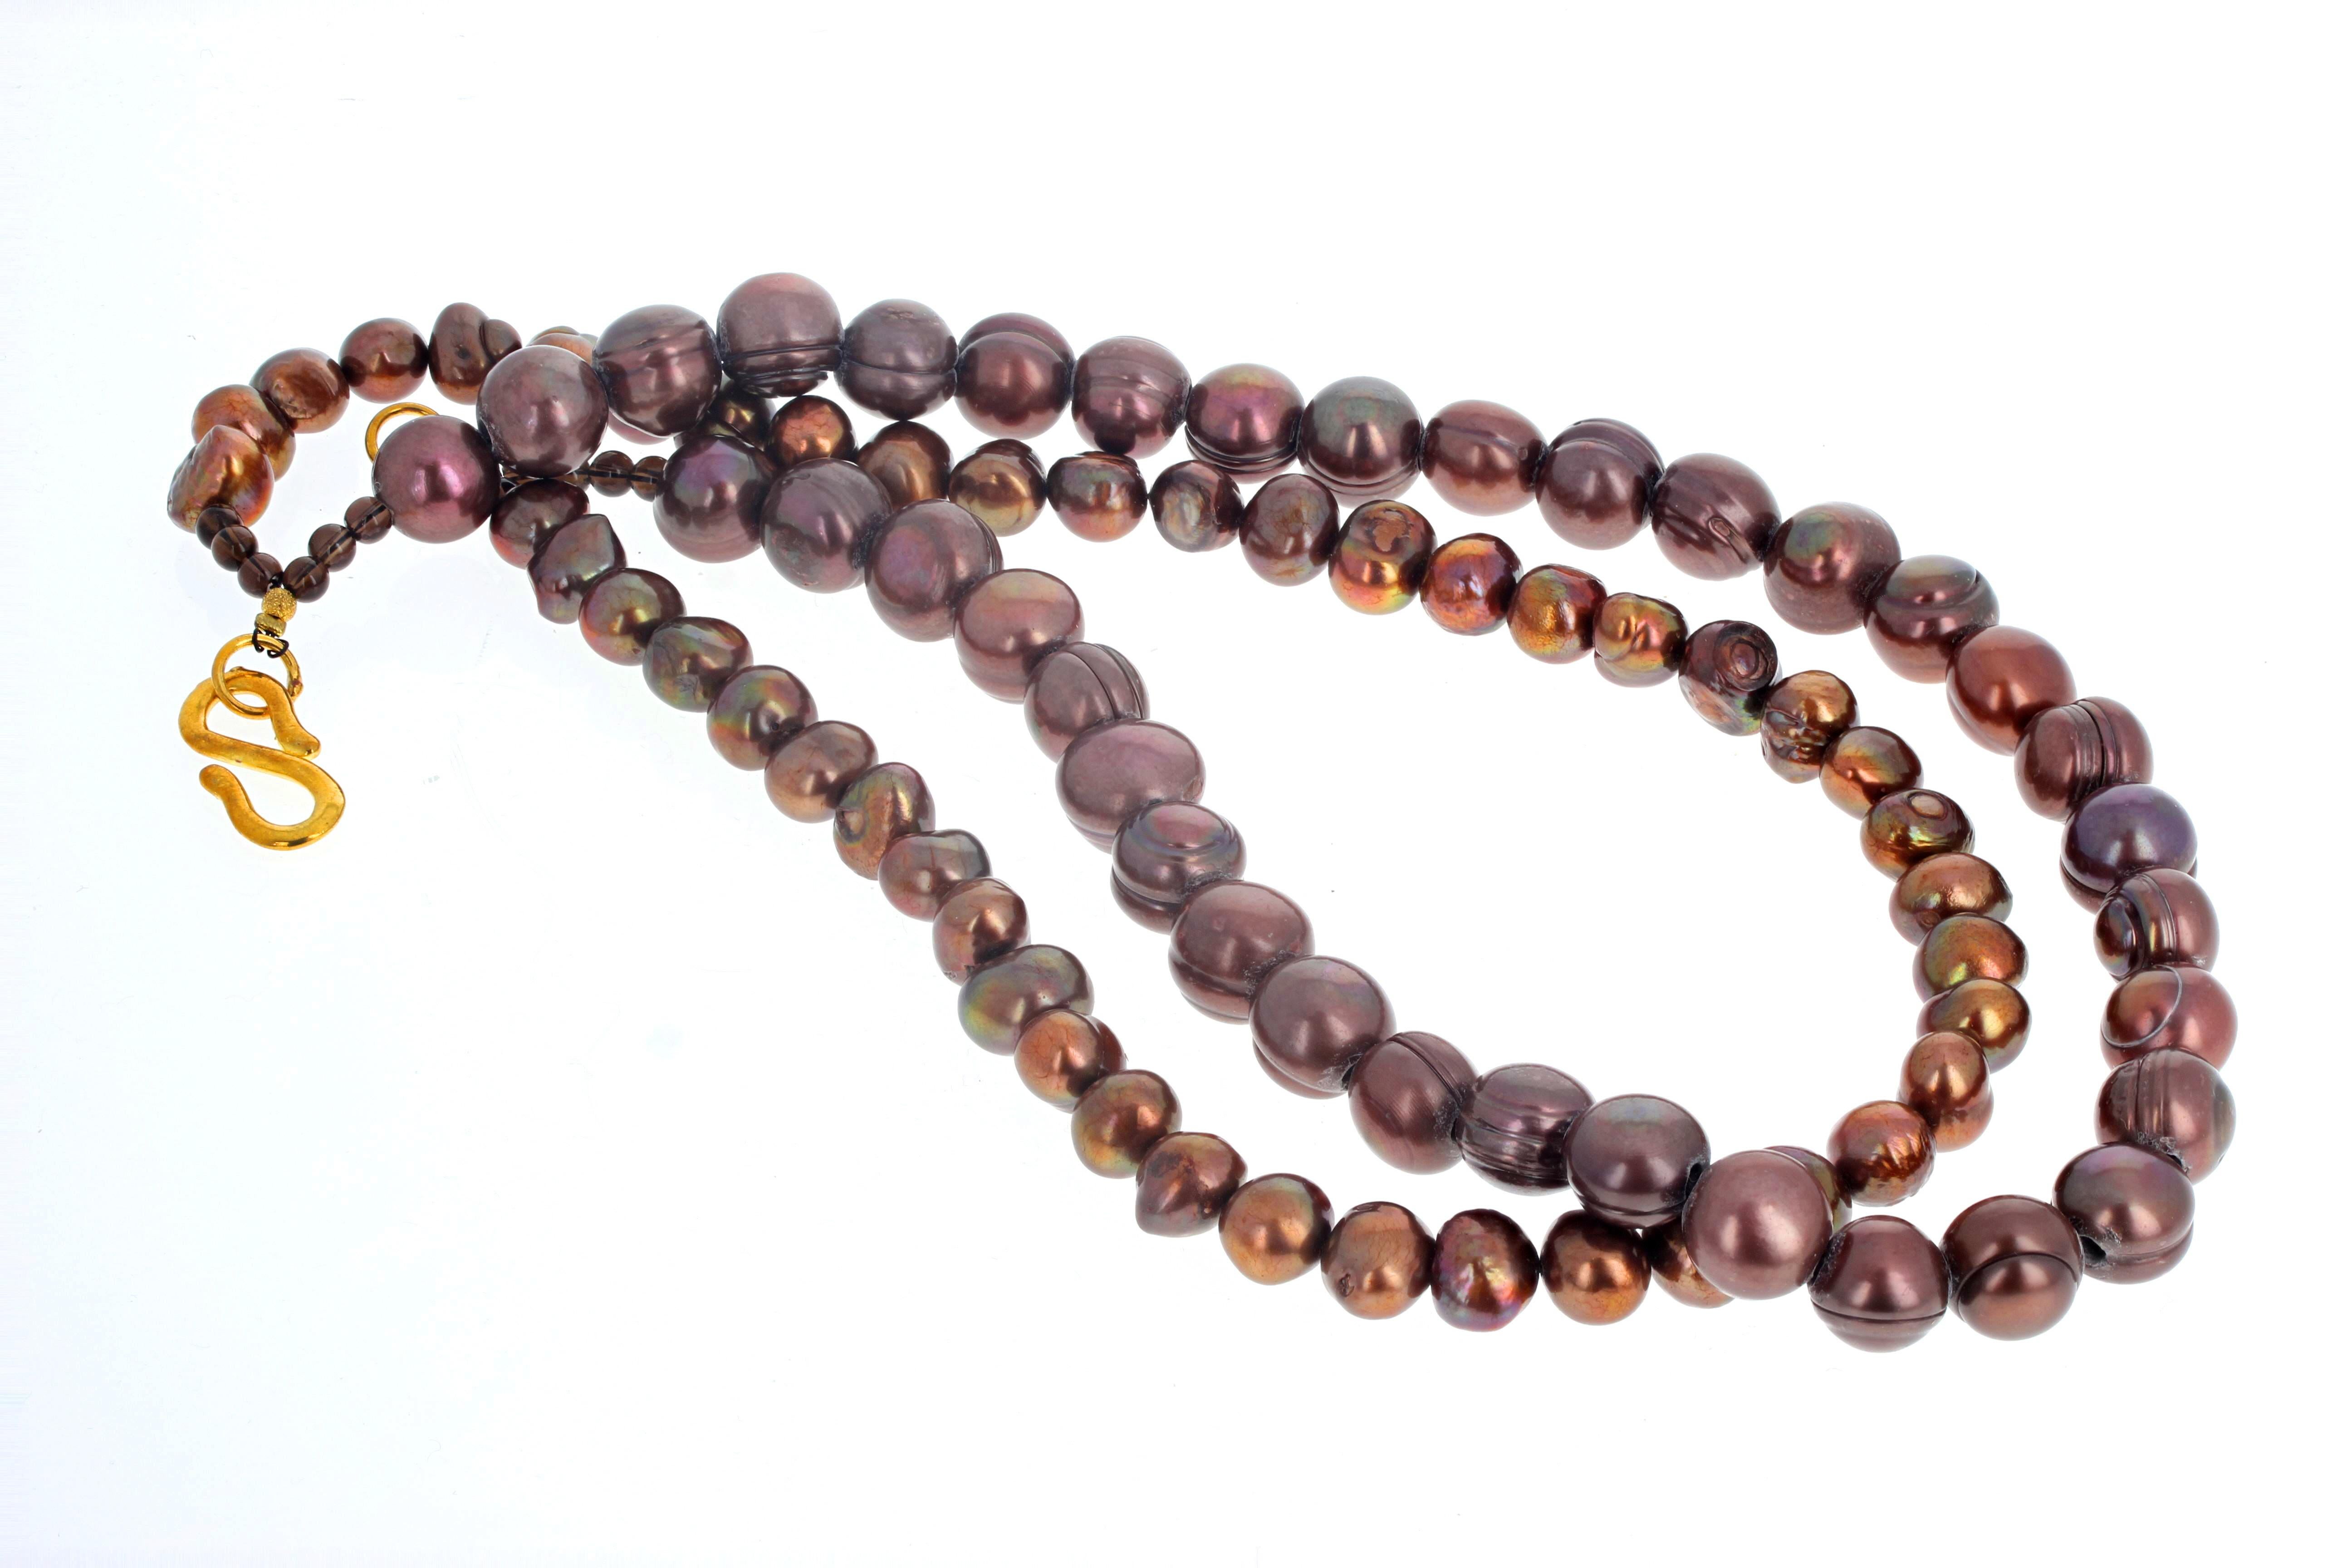 Mixed Cut AJD Double Strand of Magnificently Glowing Natural Cultured Pearls 19